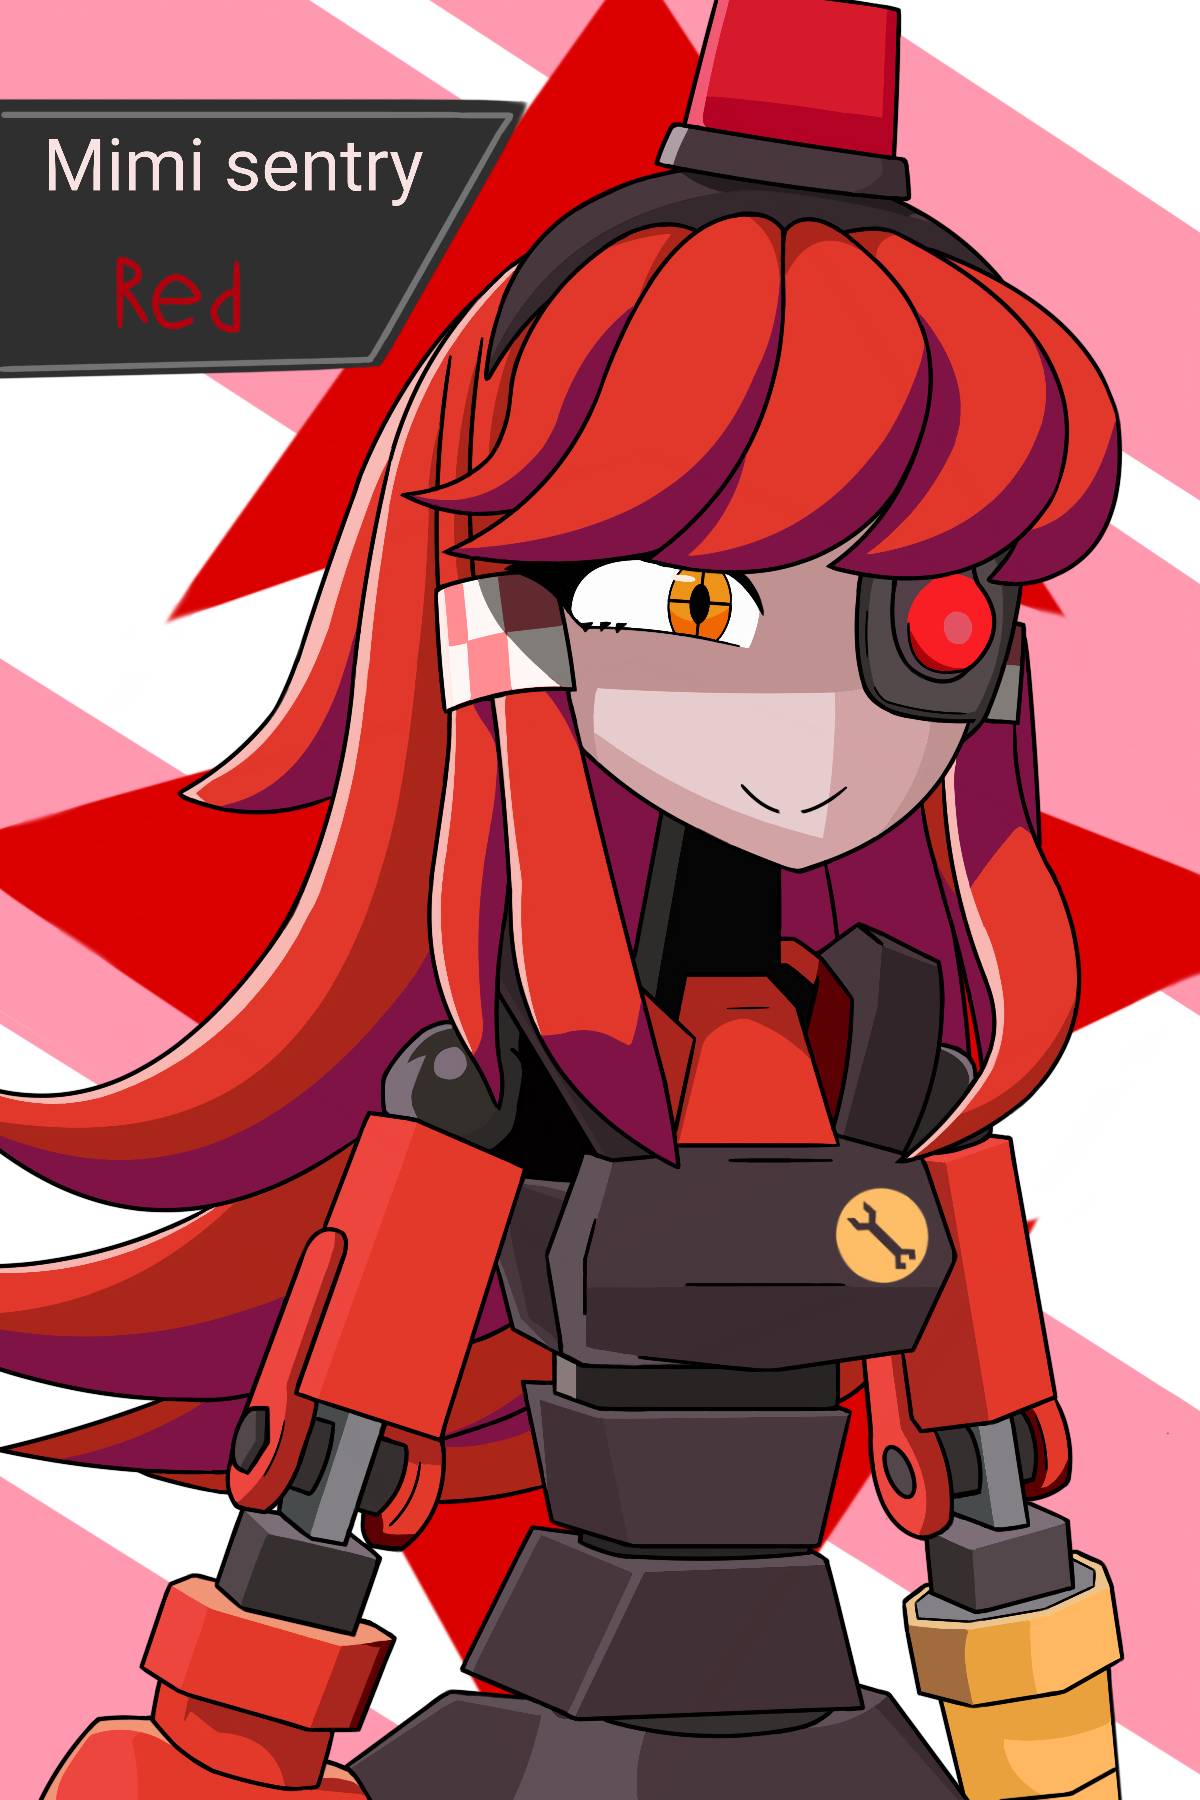 Mimi sentry.red by enless137 on DeviantArt